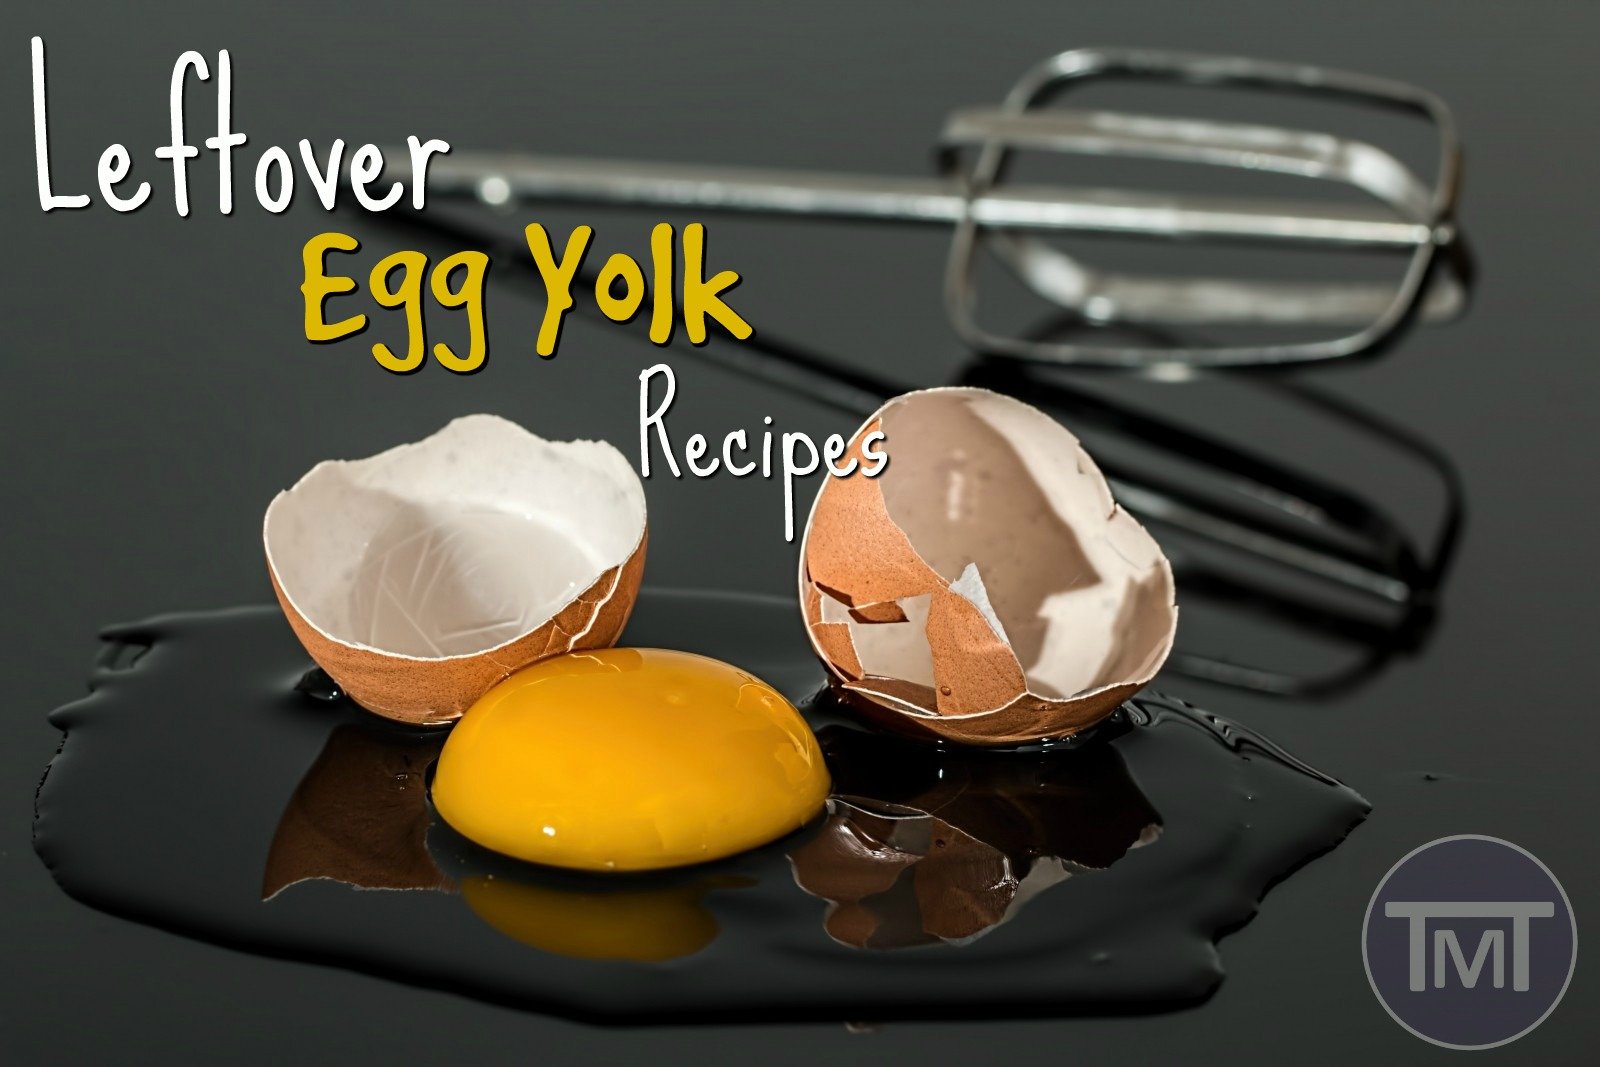 I hate waste, so after creating recipes that leave the egg yolk I needed ideas for the leftovers, here are meal, dessert and snack ideas to choose from.